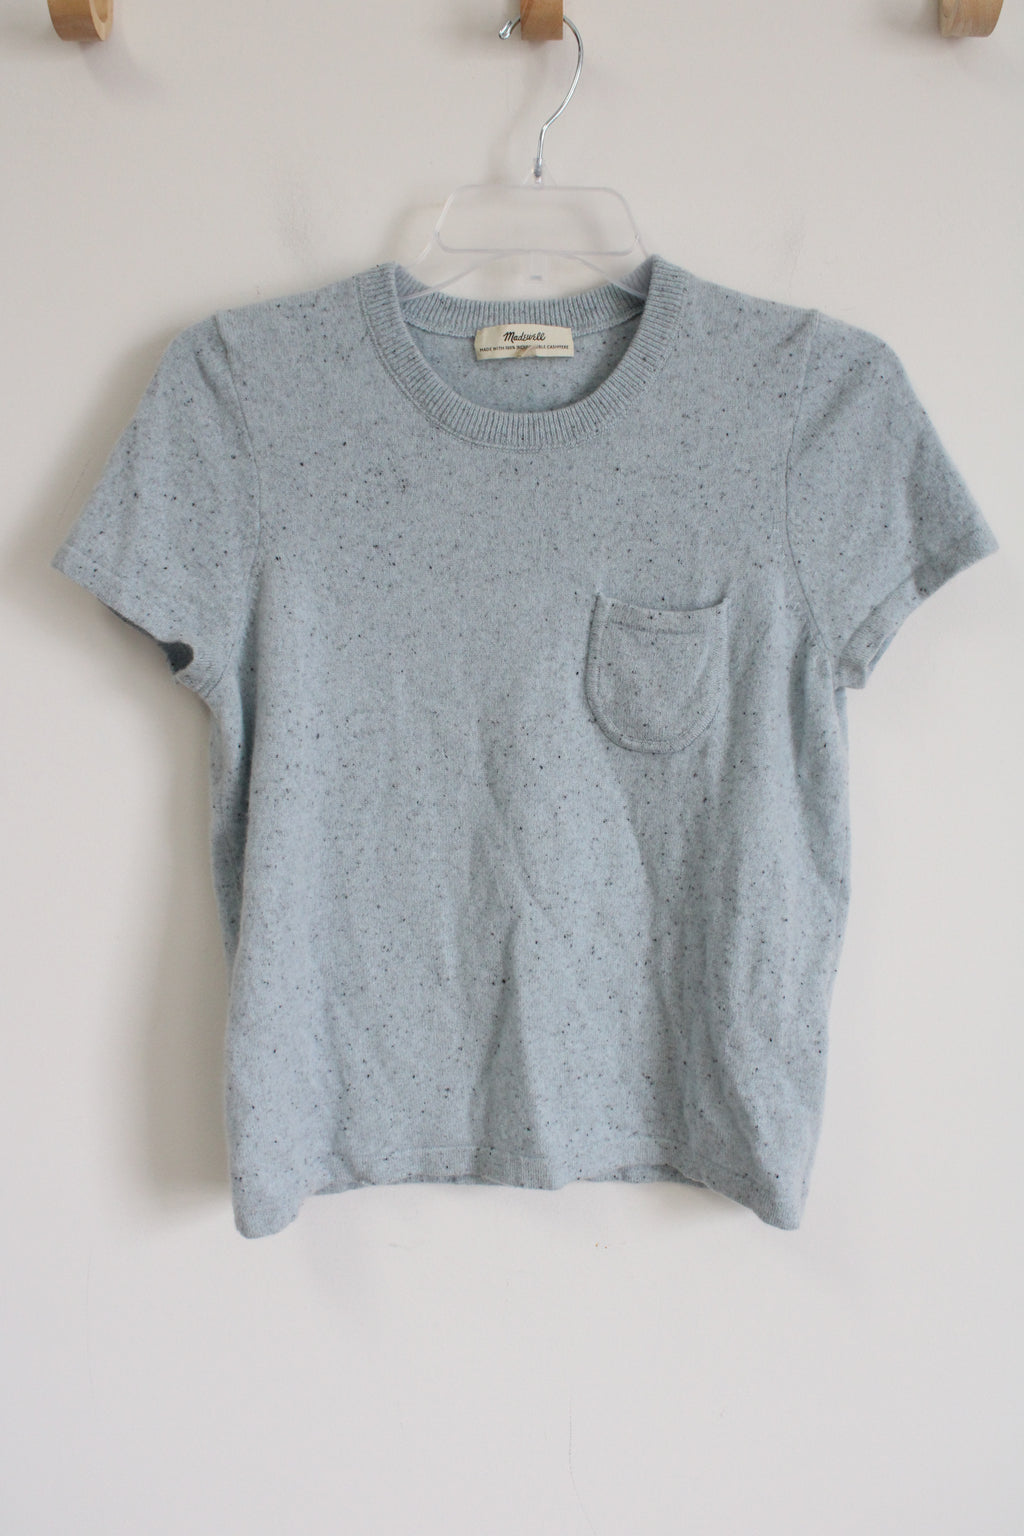 Madewell Cashmere Light Blue Knit Short Sleeved Sweater Top | M